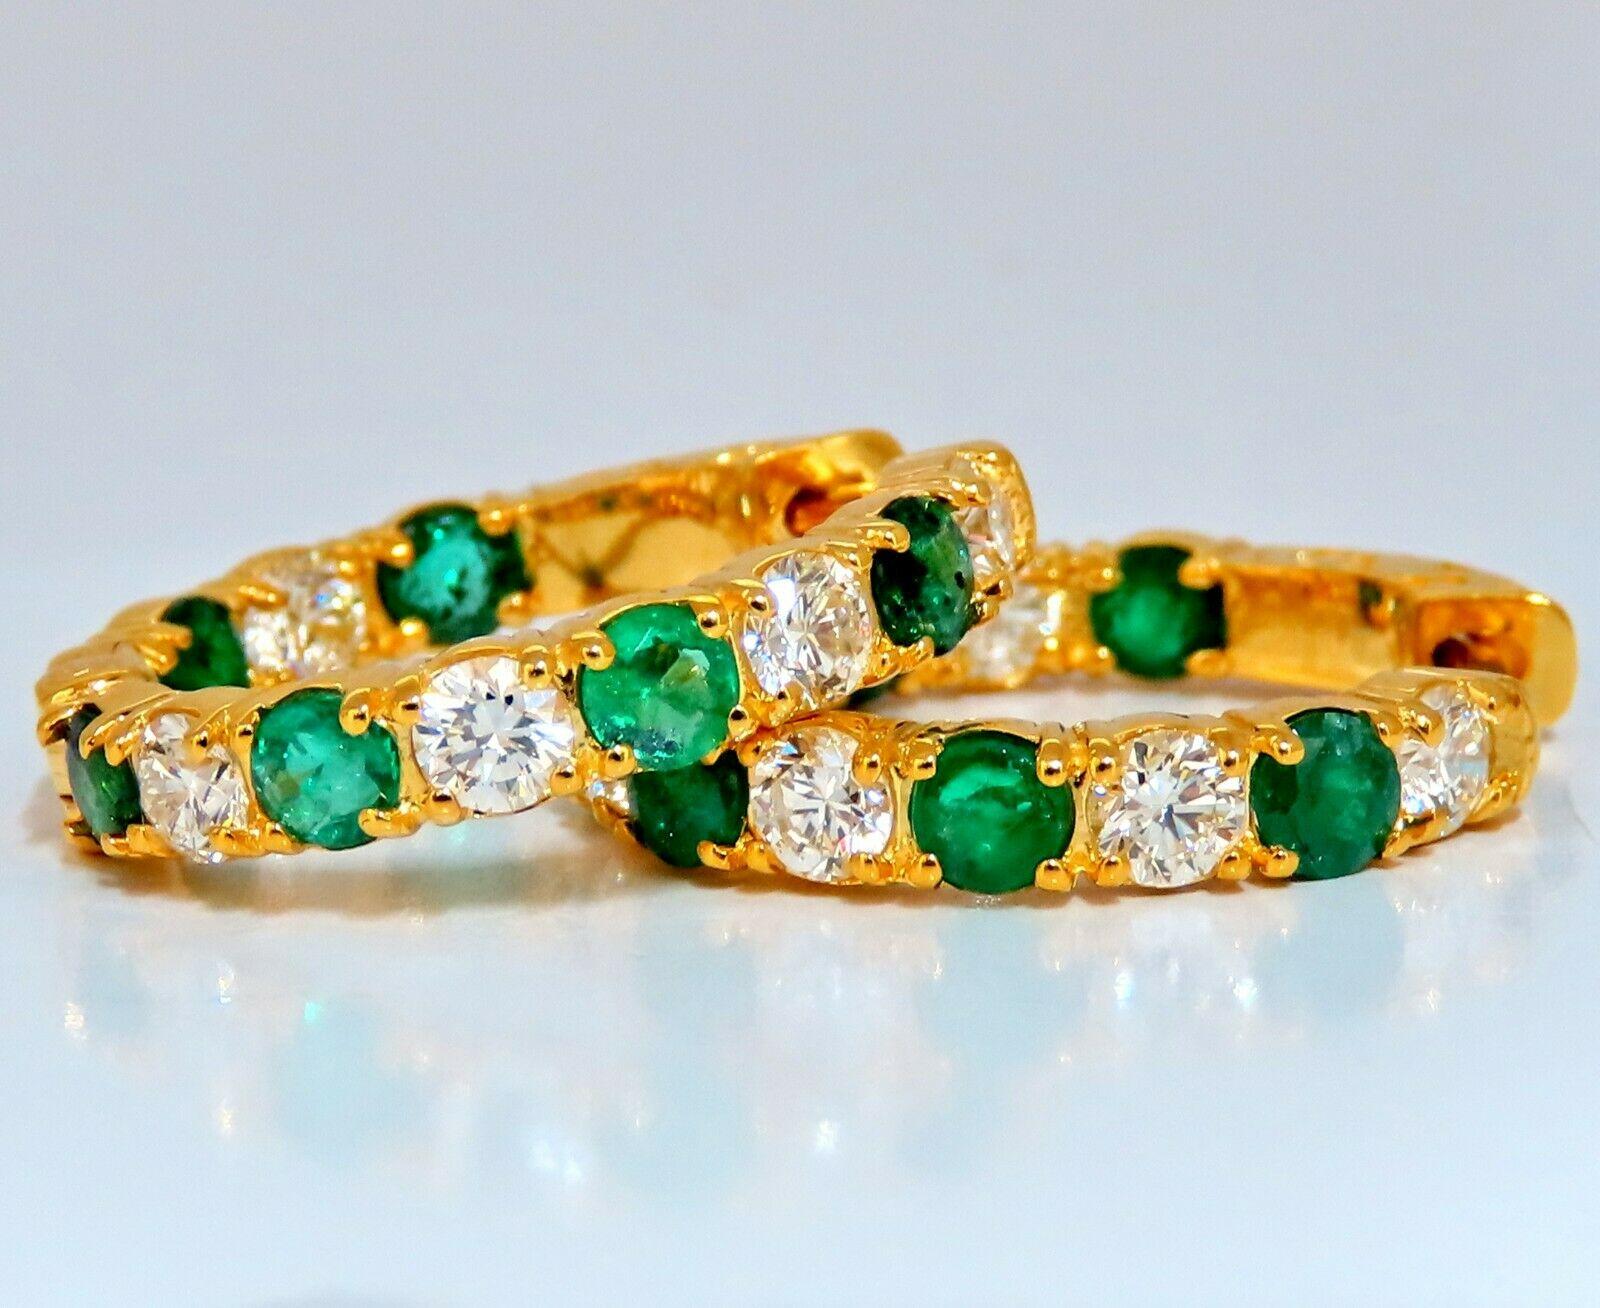 Women's or Men's 3.34ct Natural Emerald Diamonds Hoop Earrings 14kt Yellow Gold Inside Out